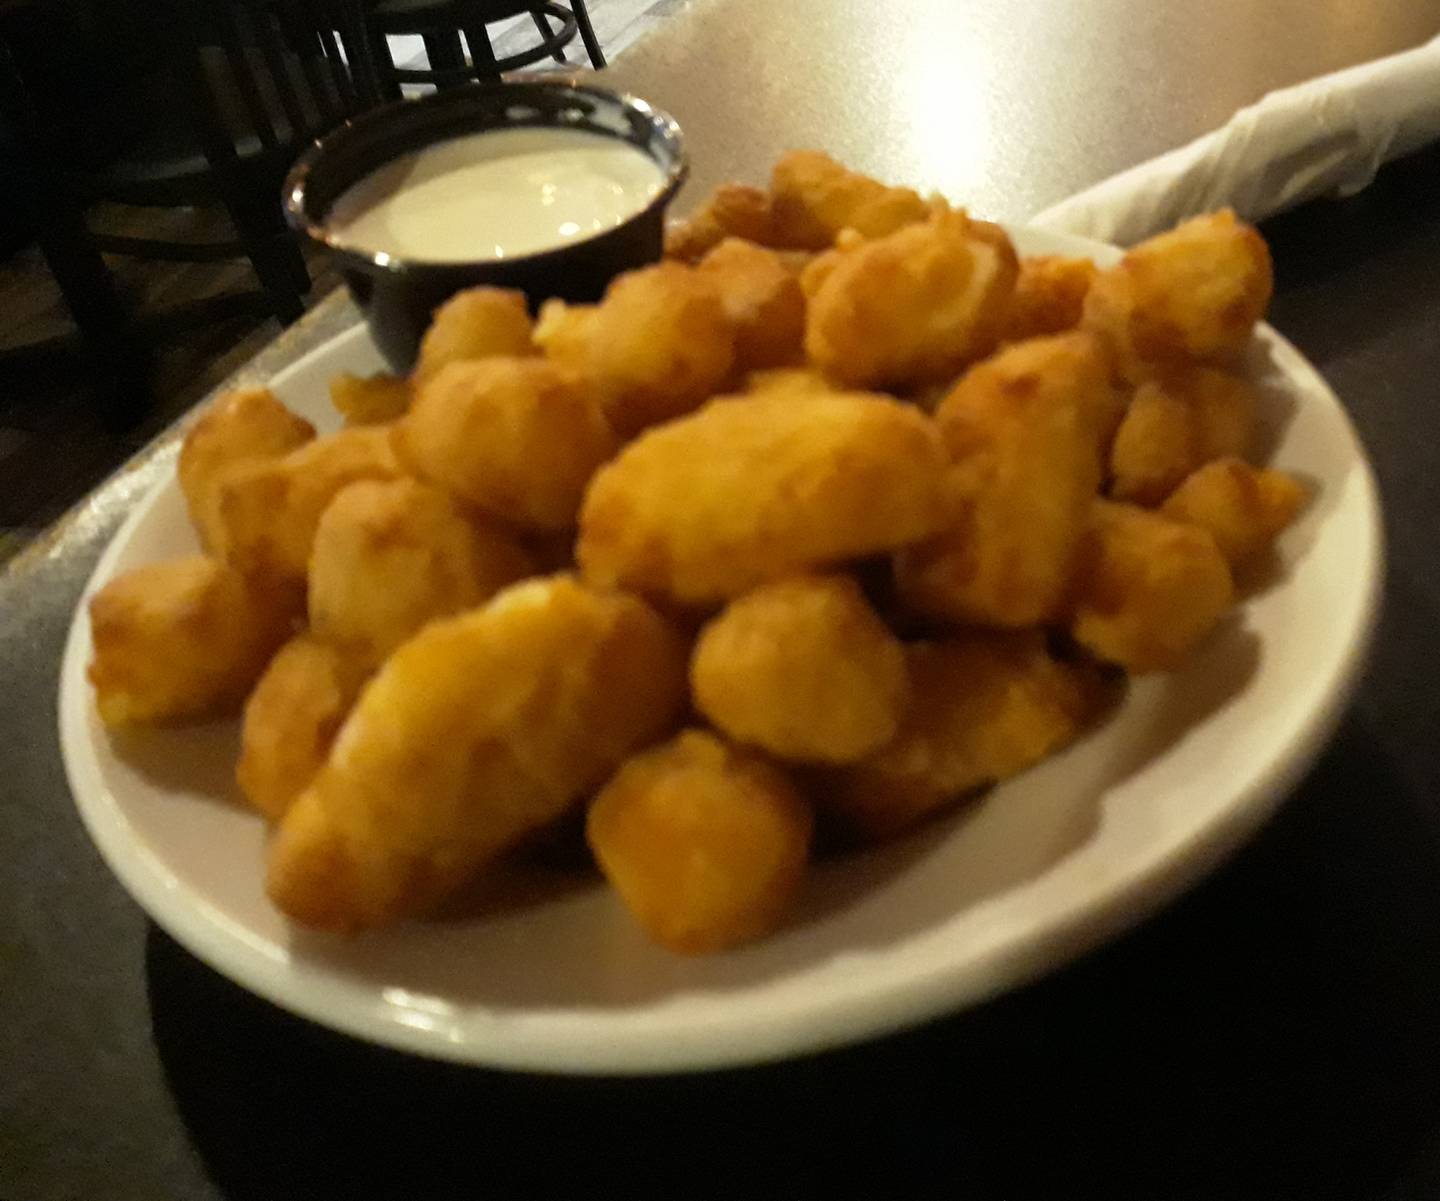 Riverfront Bar and Grill offers cheese curds on its appetizer menu, offering them in regular and garlic flavors.